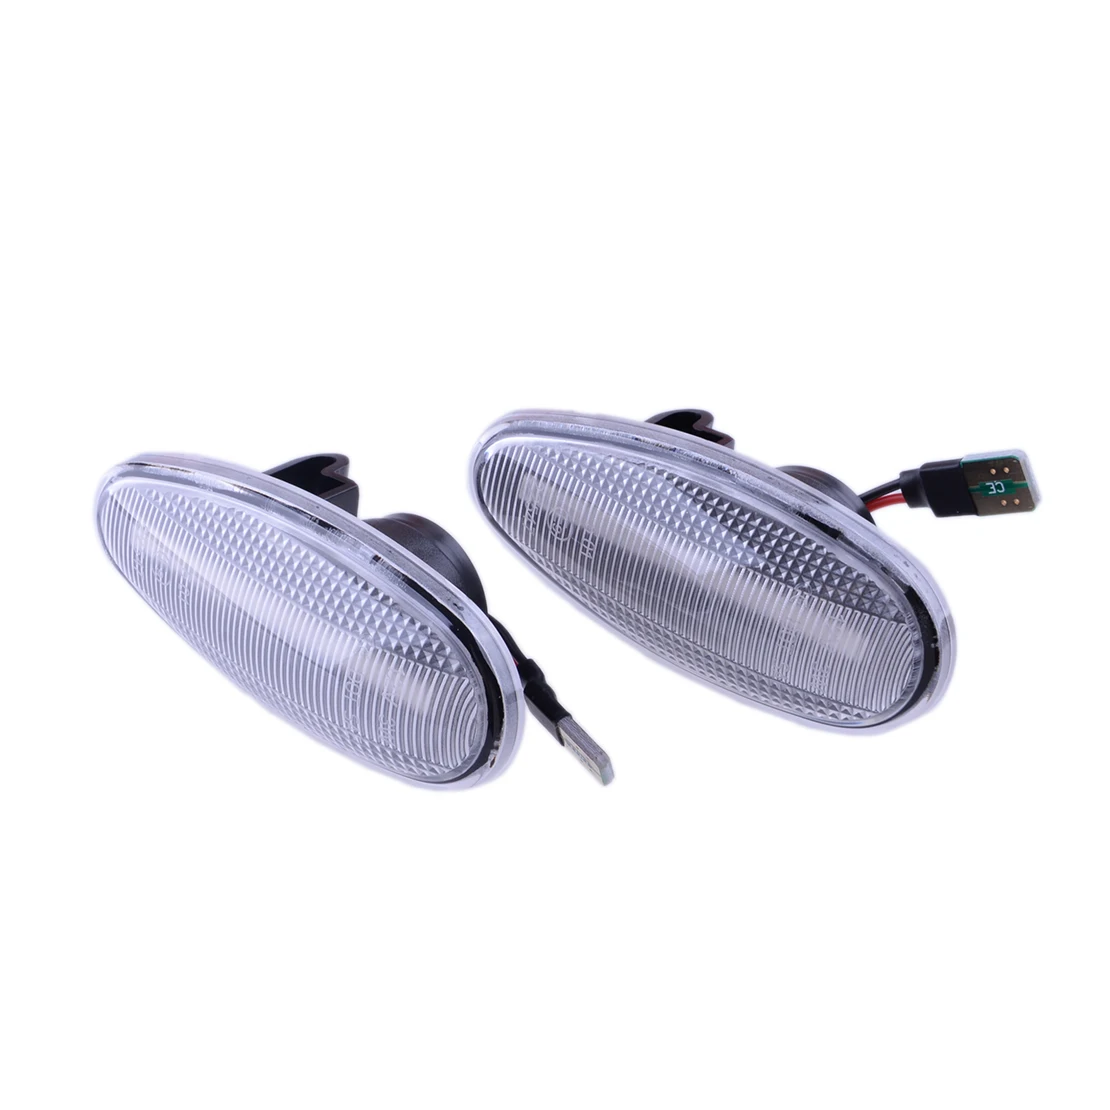 

1 Pair 12V Side Marker Turn Signal Light Clear Lens LED Fit for Mitsubishi Outlander Lancer I-Miev Pajero Galant Space Wagon 3W